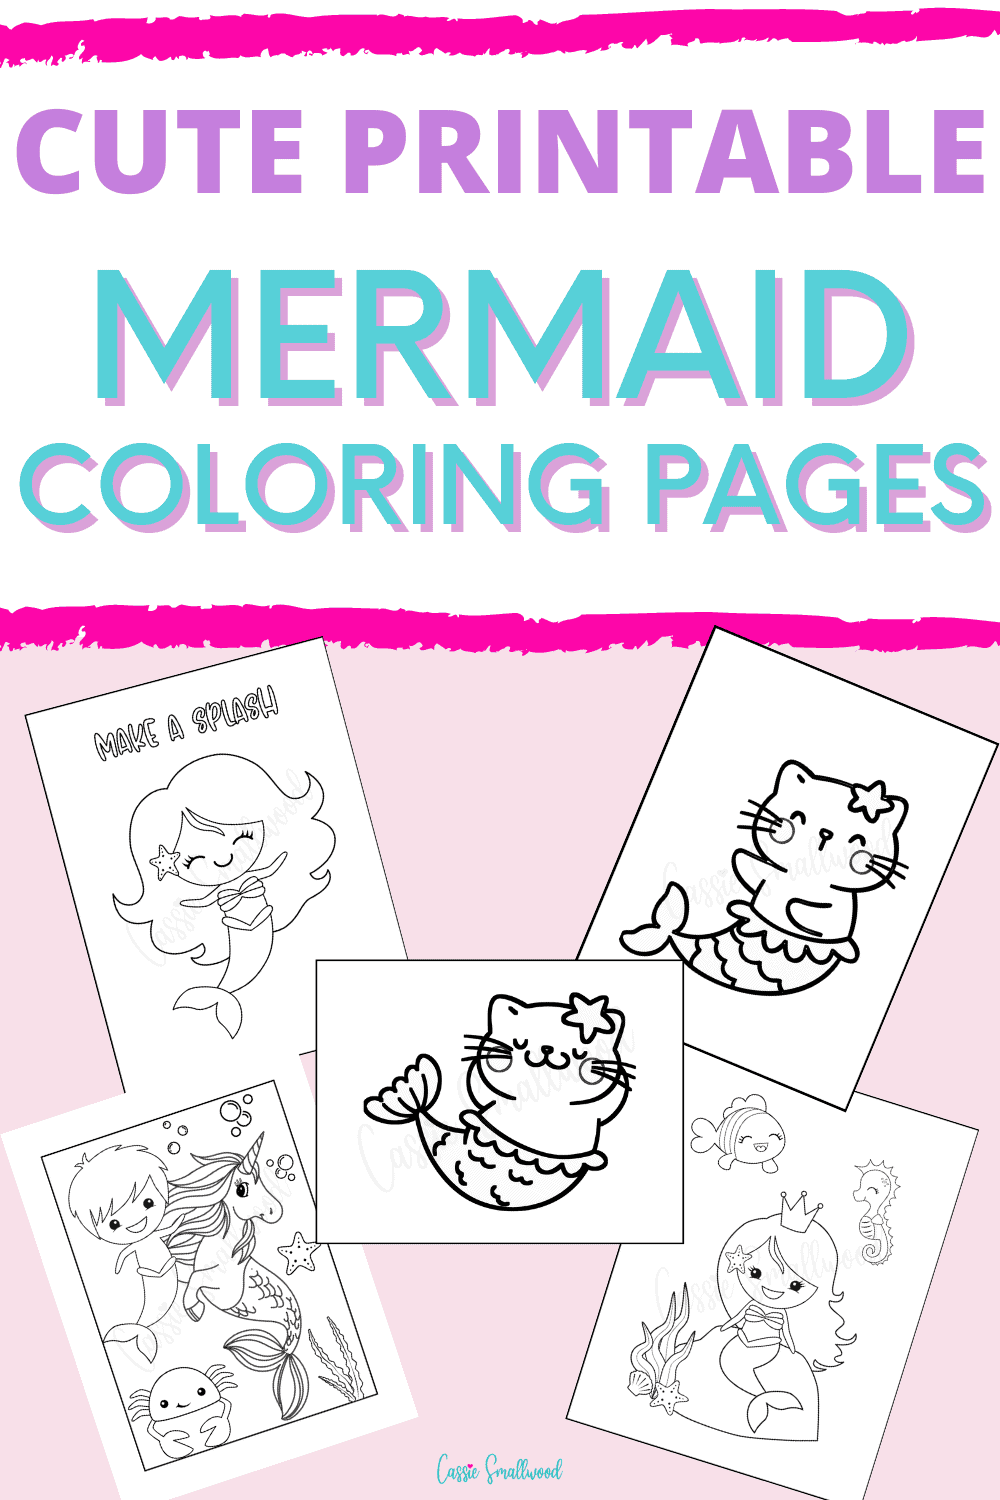 Cute Mermaid Coloring Pages For Kids   Cassie Smallwood